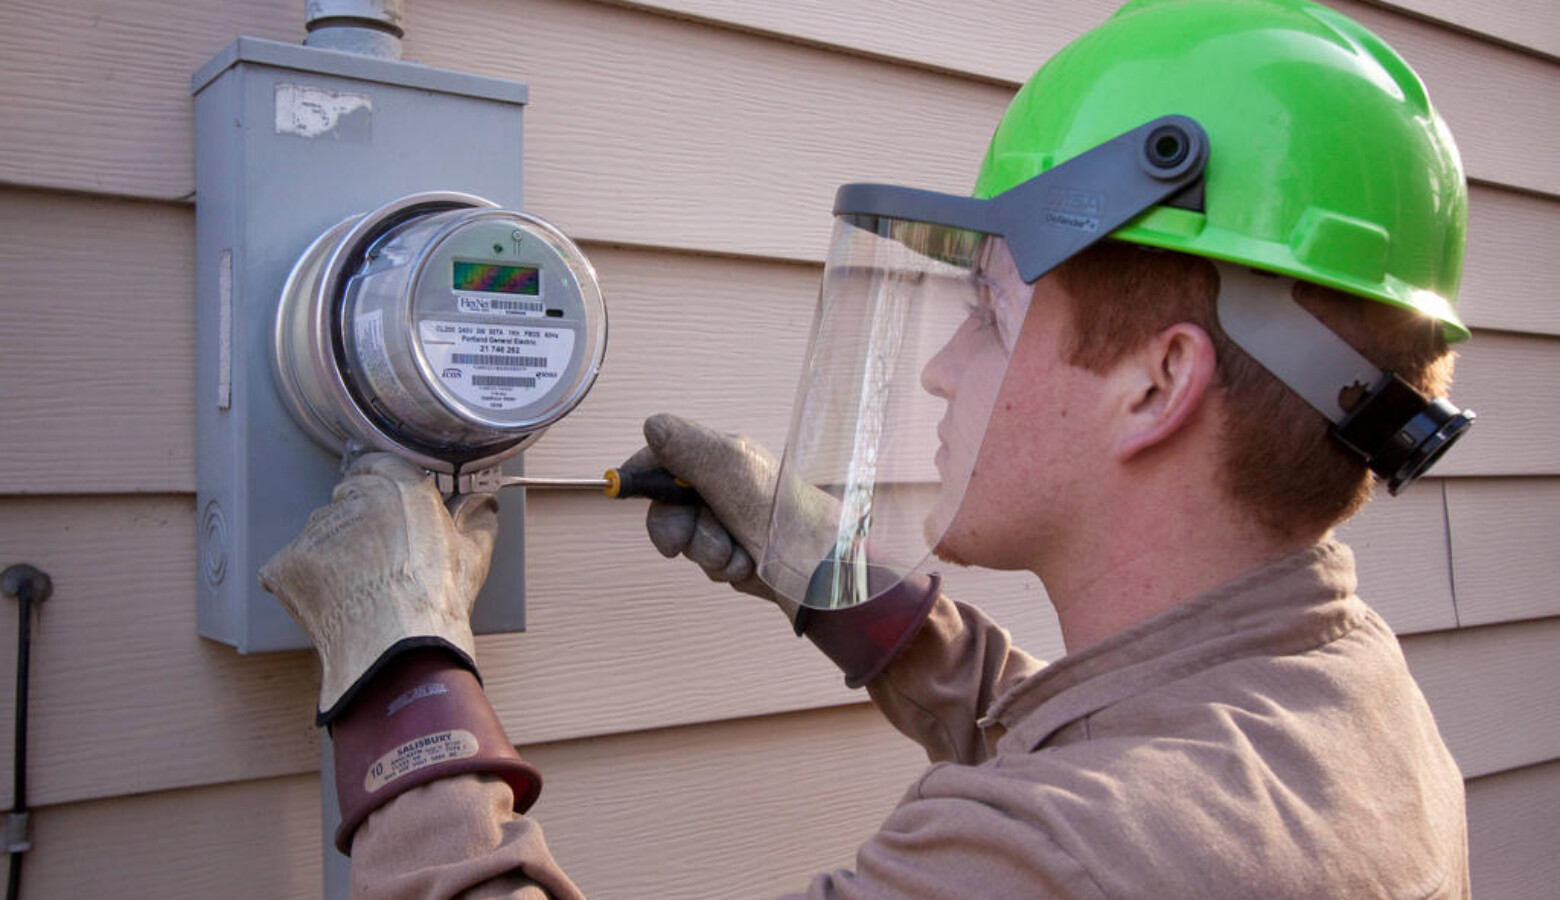 An employee of Wellington Energy Inc. works to install a new watthour meter at a residence in Portland, Oregon. (Portland General Electric)